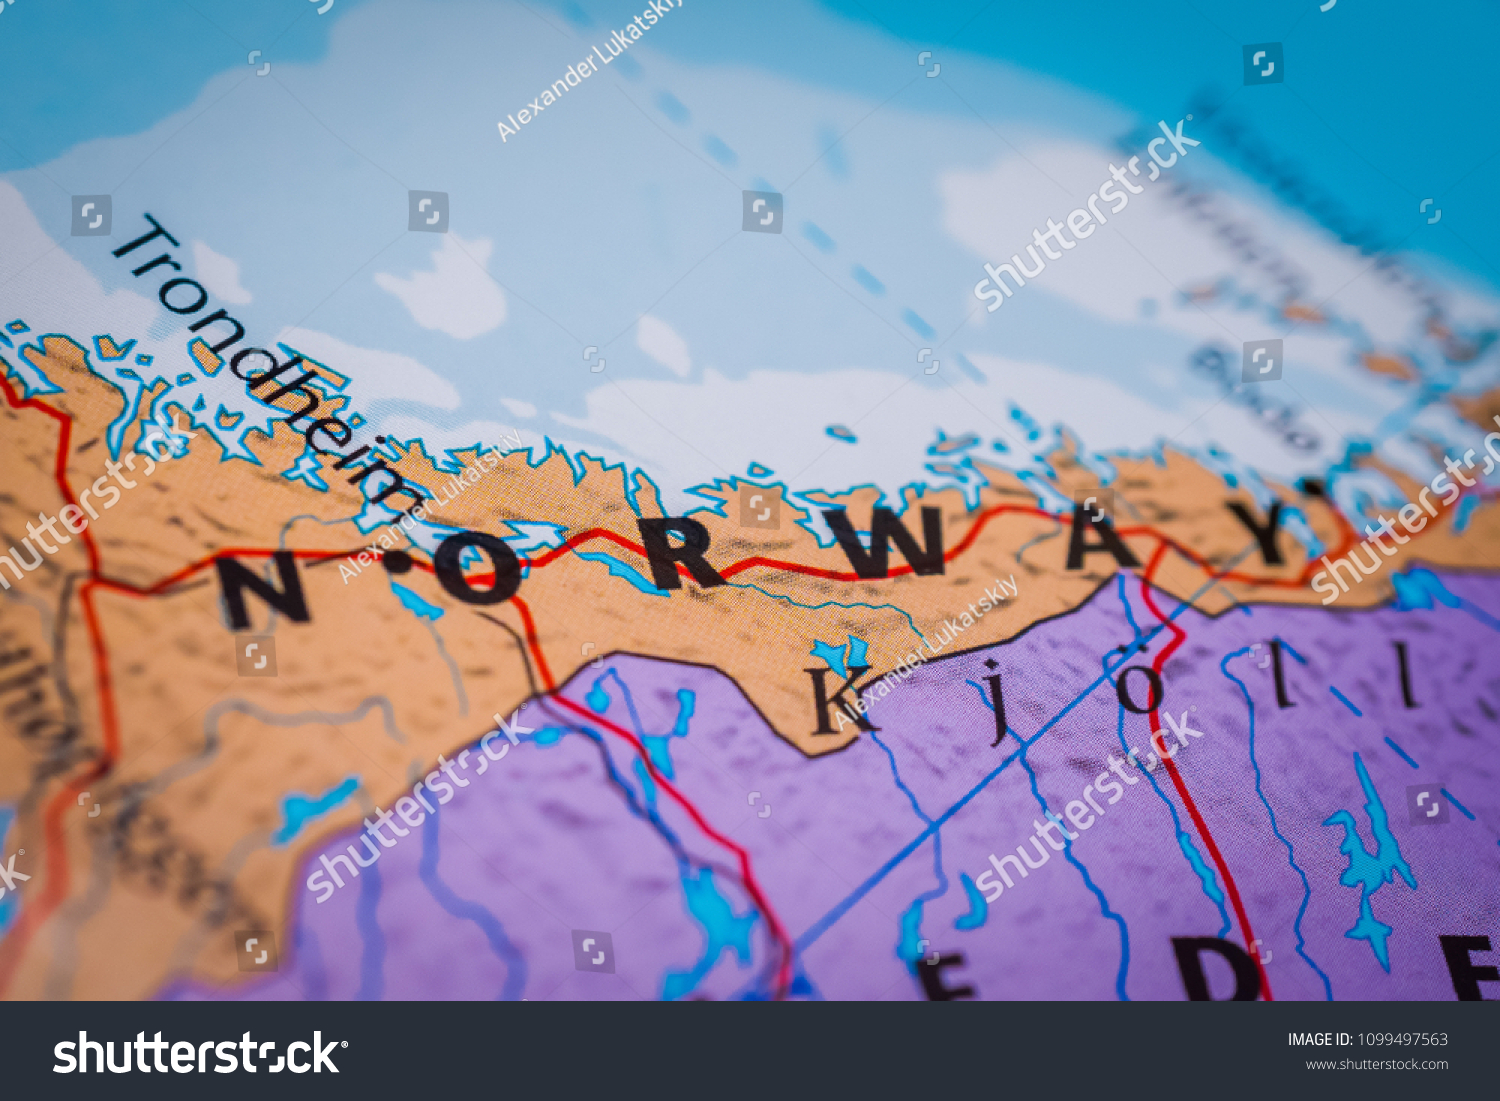 Stock Photo Norway On The Europe Map 1099497563 